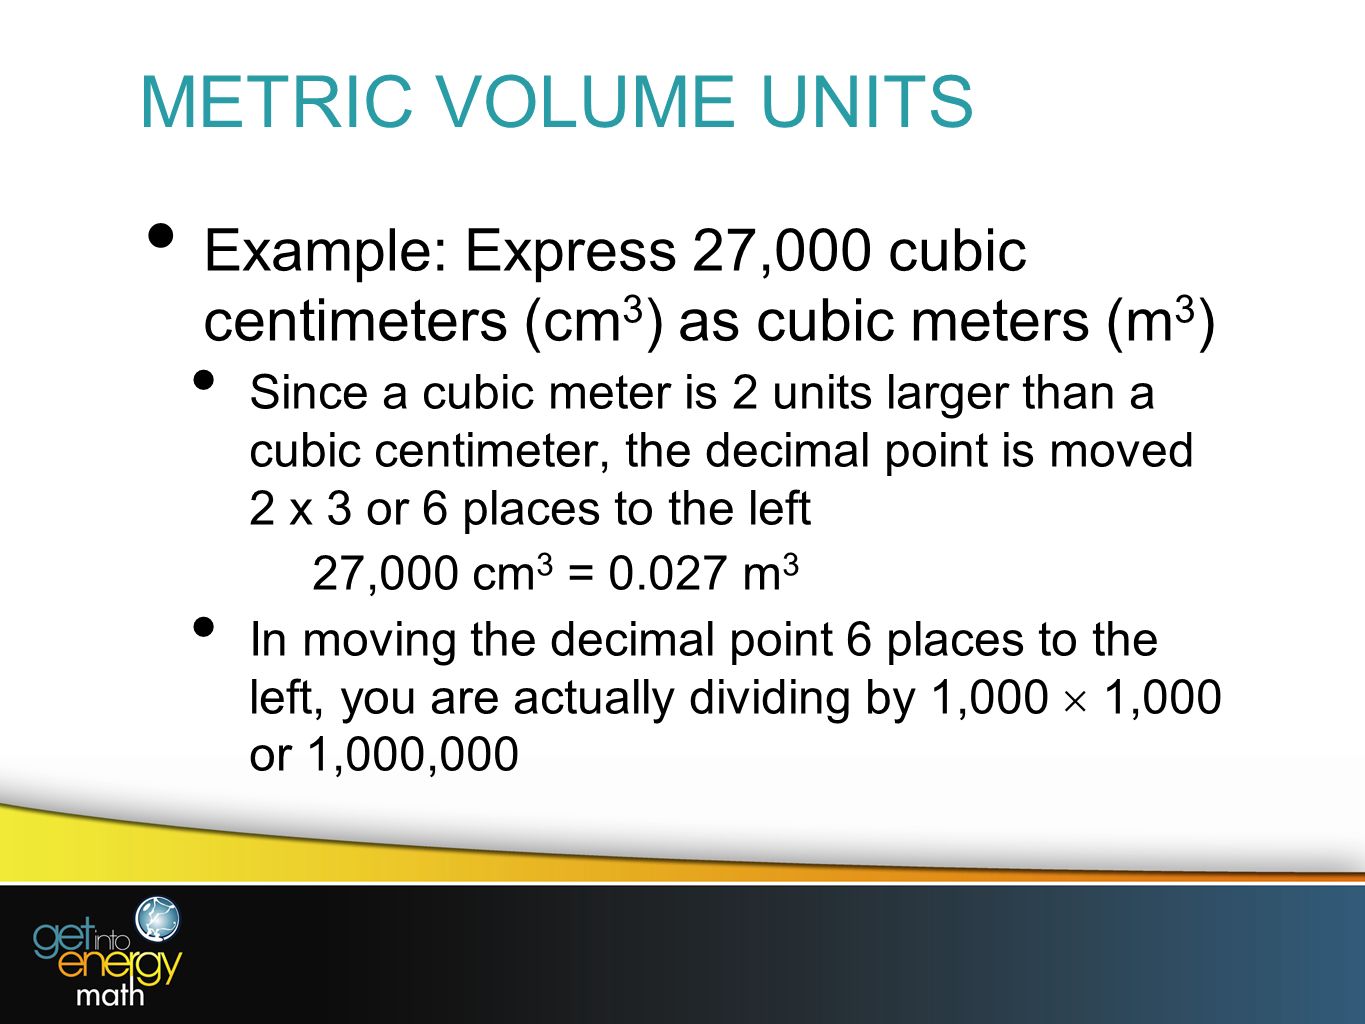 METRIC VOLUME UNITS Example: Express 27,000 cubic centimeters (cm3) as cubic meters (m3)